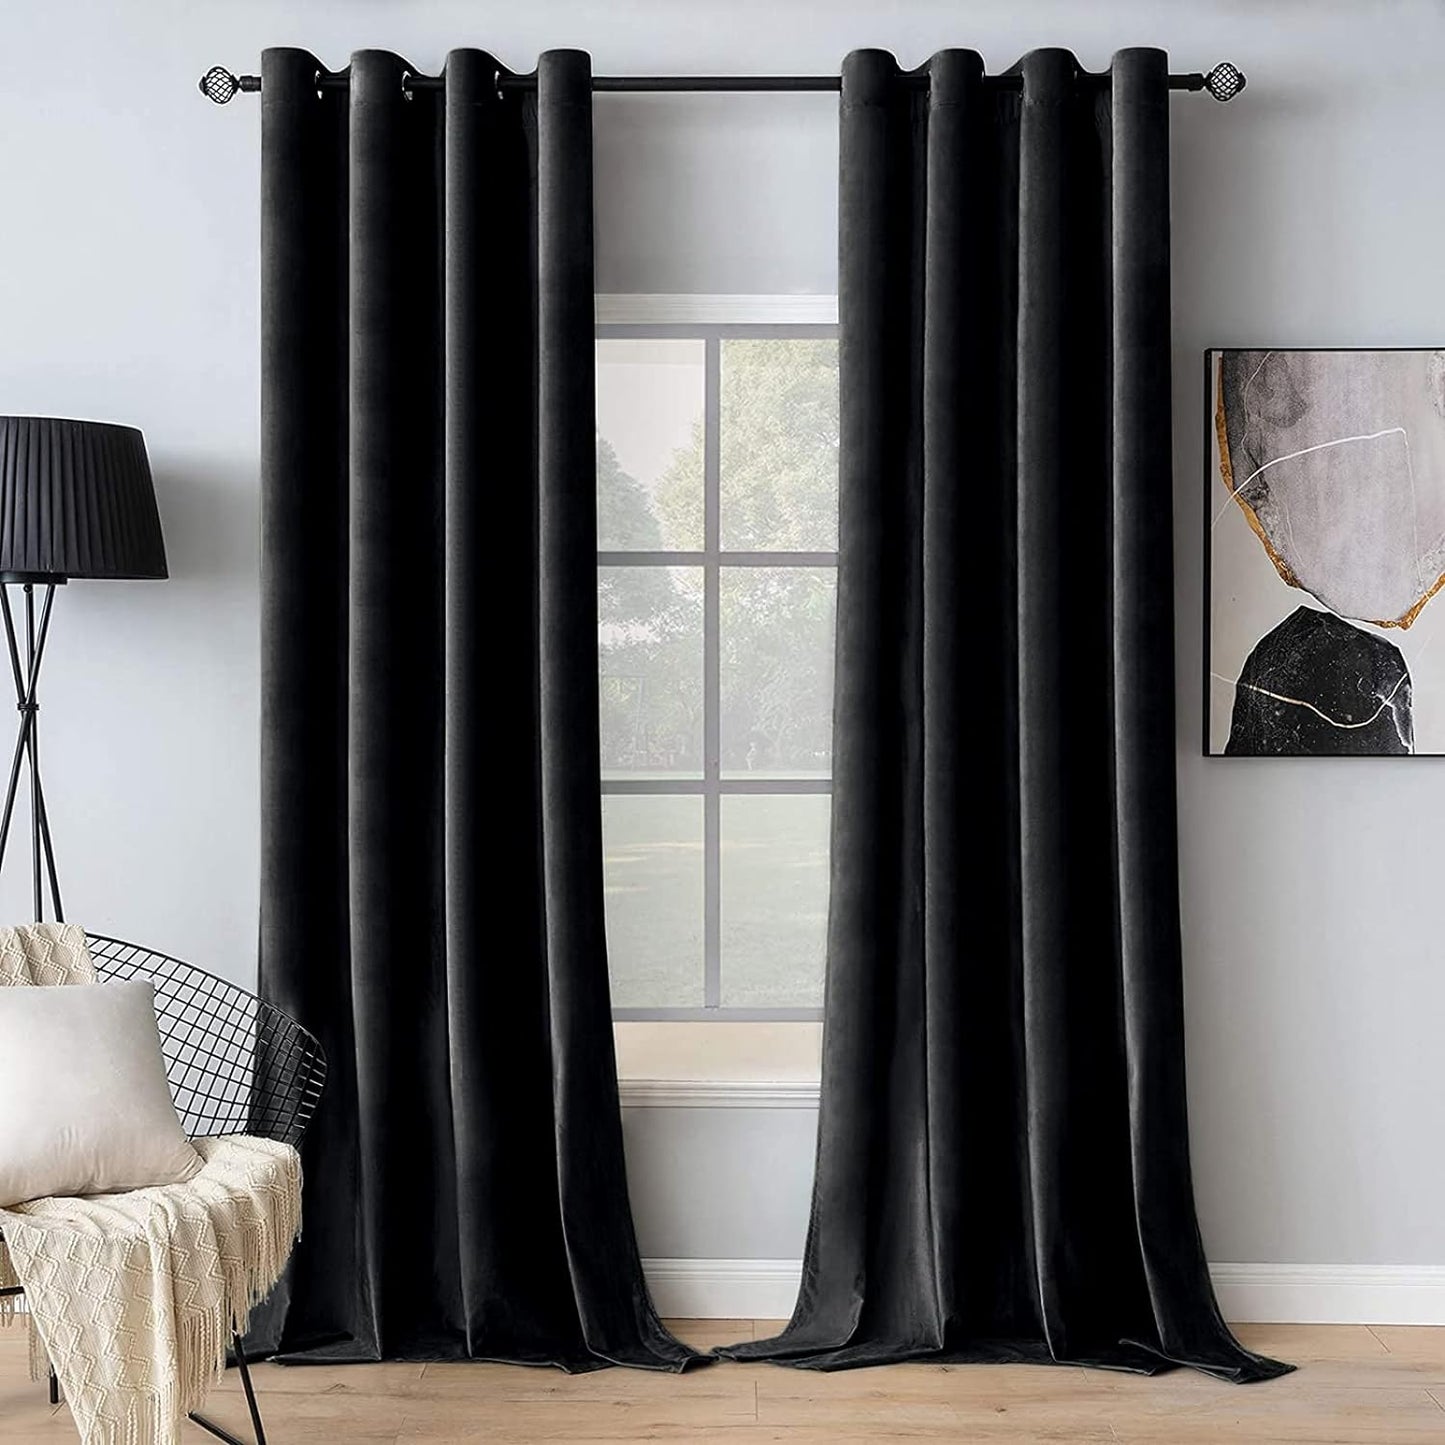 MIULEE Velvet Curtains Olive Green Elegant Grommet Curtains Thermal Insulated Soundproof Room Darkening Curtains/Drapes for Classical Living Room Bedroom Decor 52 X 84 Inch Set of 2  MIULEE Black W52 X L96 